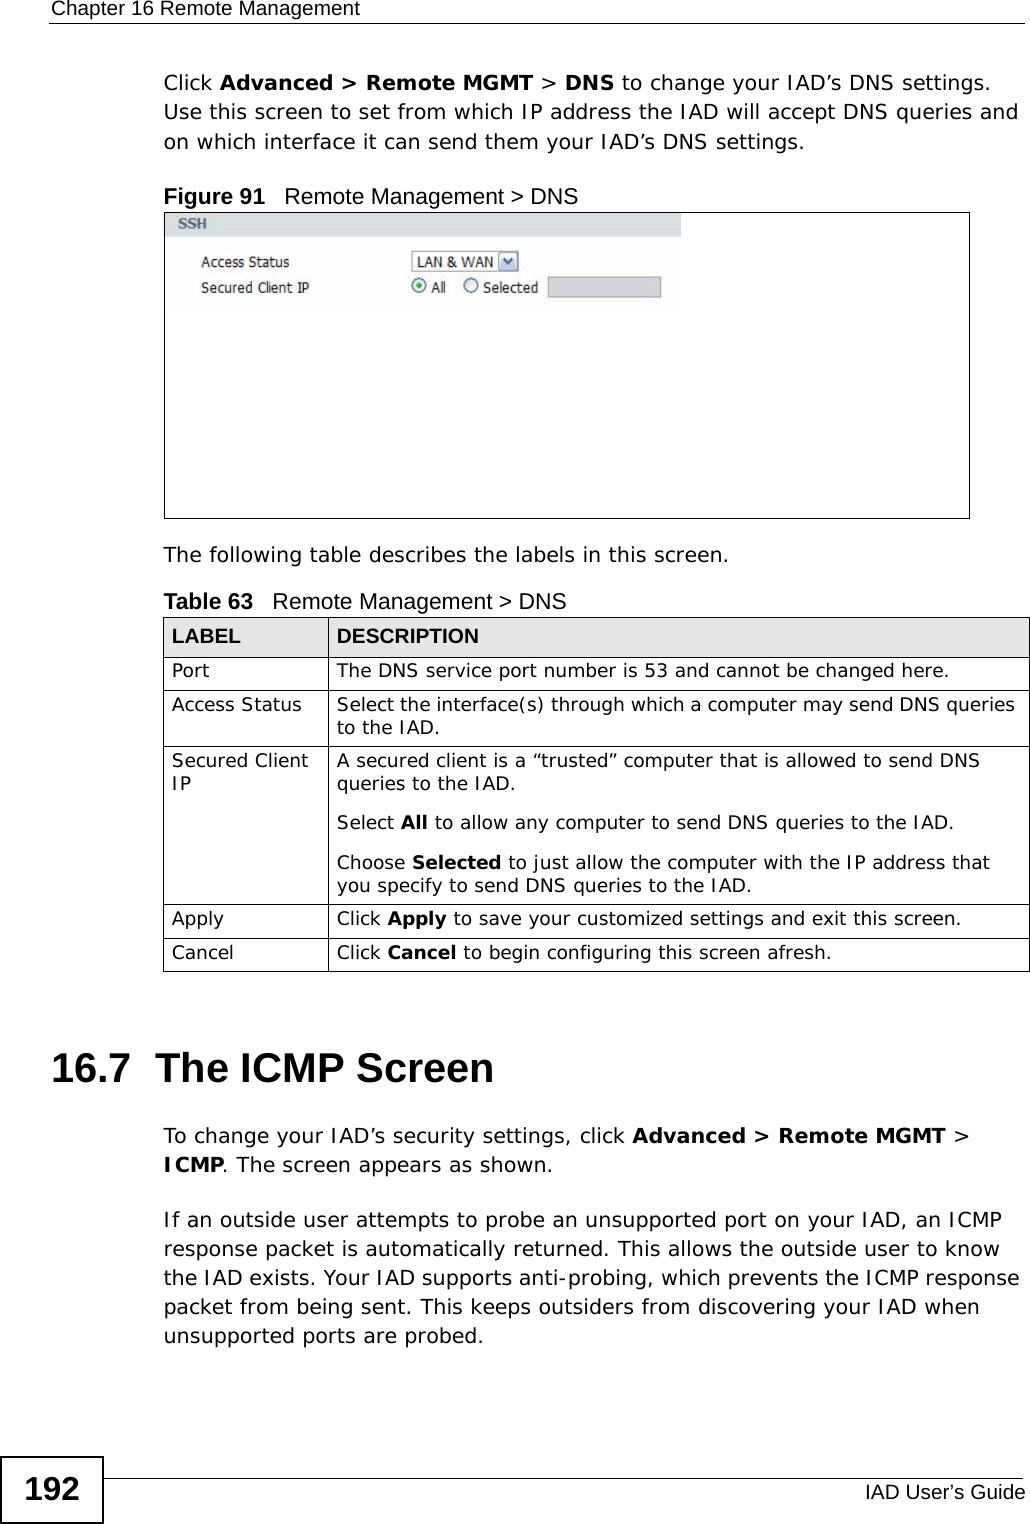 Chapter 16 Remote ManagementIAD User’s Guide192Click Advanced &gt; Remote MGMT &gt; DNS to change your IAD’s DNS settings. Use this screen to set from which IP address the IAD will accept DNS queries and on which interface it can send them your IAD’s DNS settings.Figure 91   Remote Management &gt; DNSThe following table describes the labels in this screen.16.7  The ICMP Screen To change your IAD’s security settings, click Advanced &gt; Remote MGMT &gt; ICMP. The screen appears as shown.If an outside user attempts to probe an unsupported port on your IAD, an ICMP response packet is automatically returned. This allows the outside user to know the IAD exists. Your IAD supports anti-probing, which prevents the ICMP response packet from being sent. This keeps outsiders from discovering your IAD when unsupported ports are probed. Table 63   Remote Management &gt; DNSLABEL DESCRIPTIONPort The DNS service port number is 53 and cannot be changed here.Access Status Select the interface(s) through which a computer may send DNS queries to the IAD.Secured Client IP A secured client is a “trusted” computer that is allowed to send DNS queries to the IAD.Select All to allow any computer to send DNS queries to the IAD.Choose Selected to just allow the computer with the IP address that you specify to send DNS queries to the IAD.Apply Click Apply to save your customized settings and exit this screen. Cancel Click Cancel to begin configuring this screen afresh.